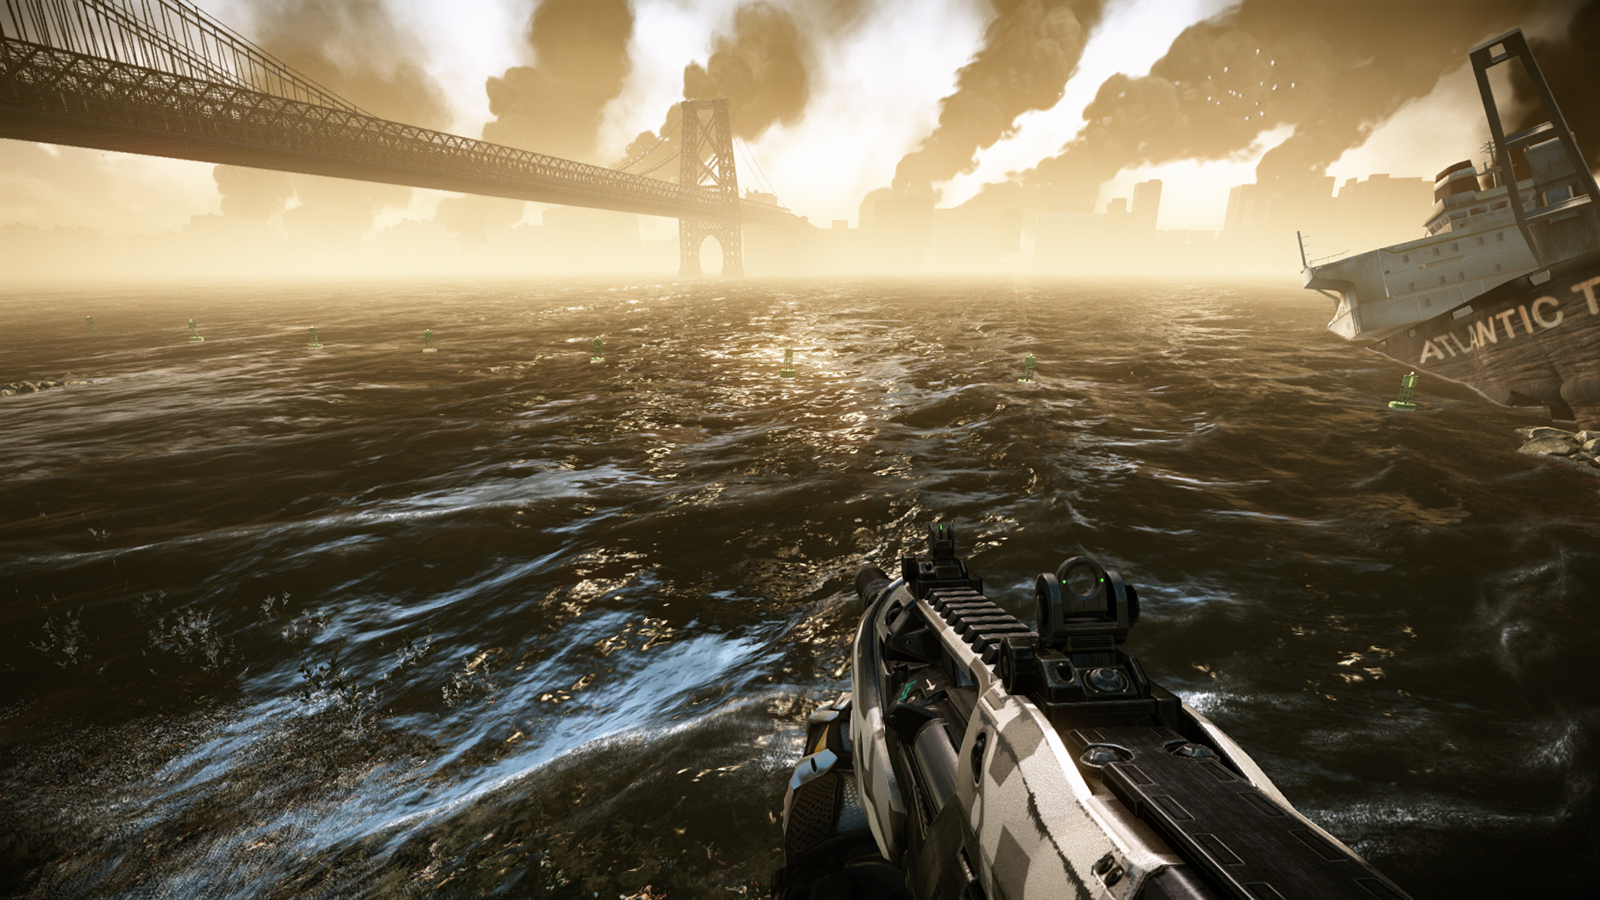 crysis 3 crack only